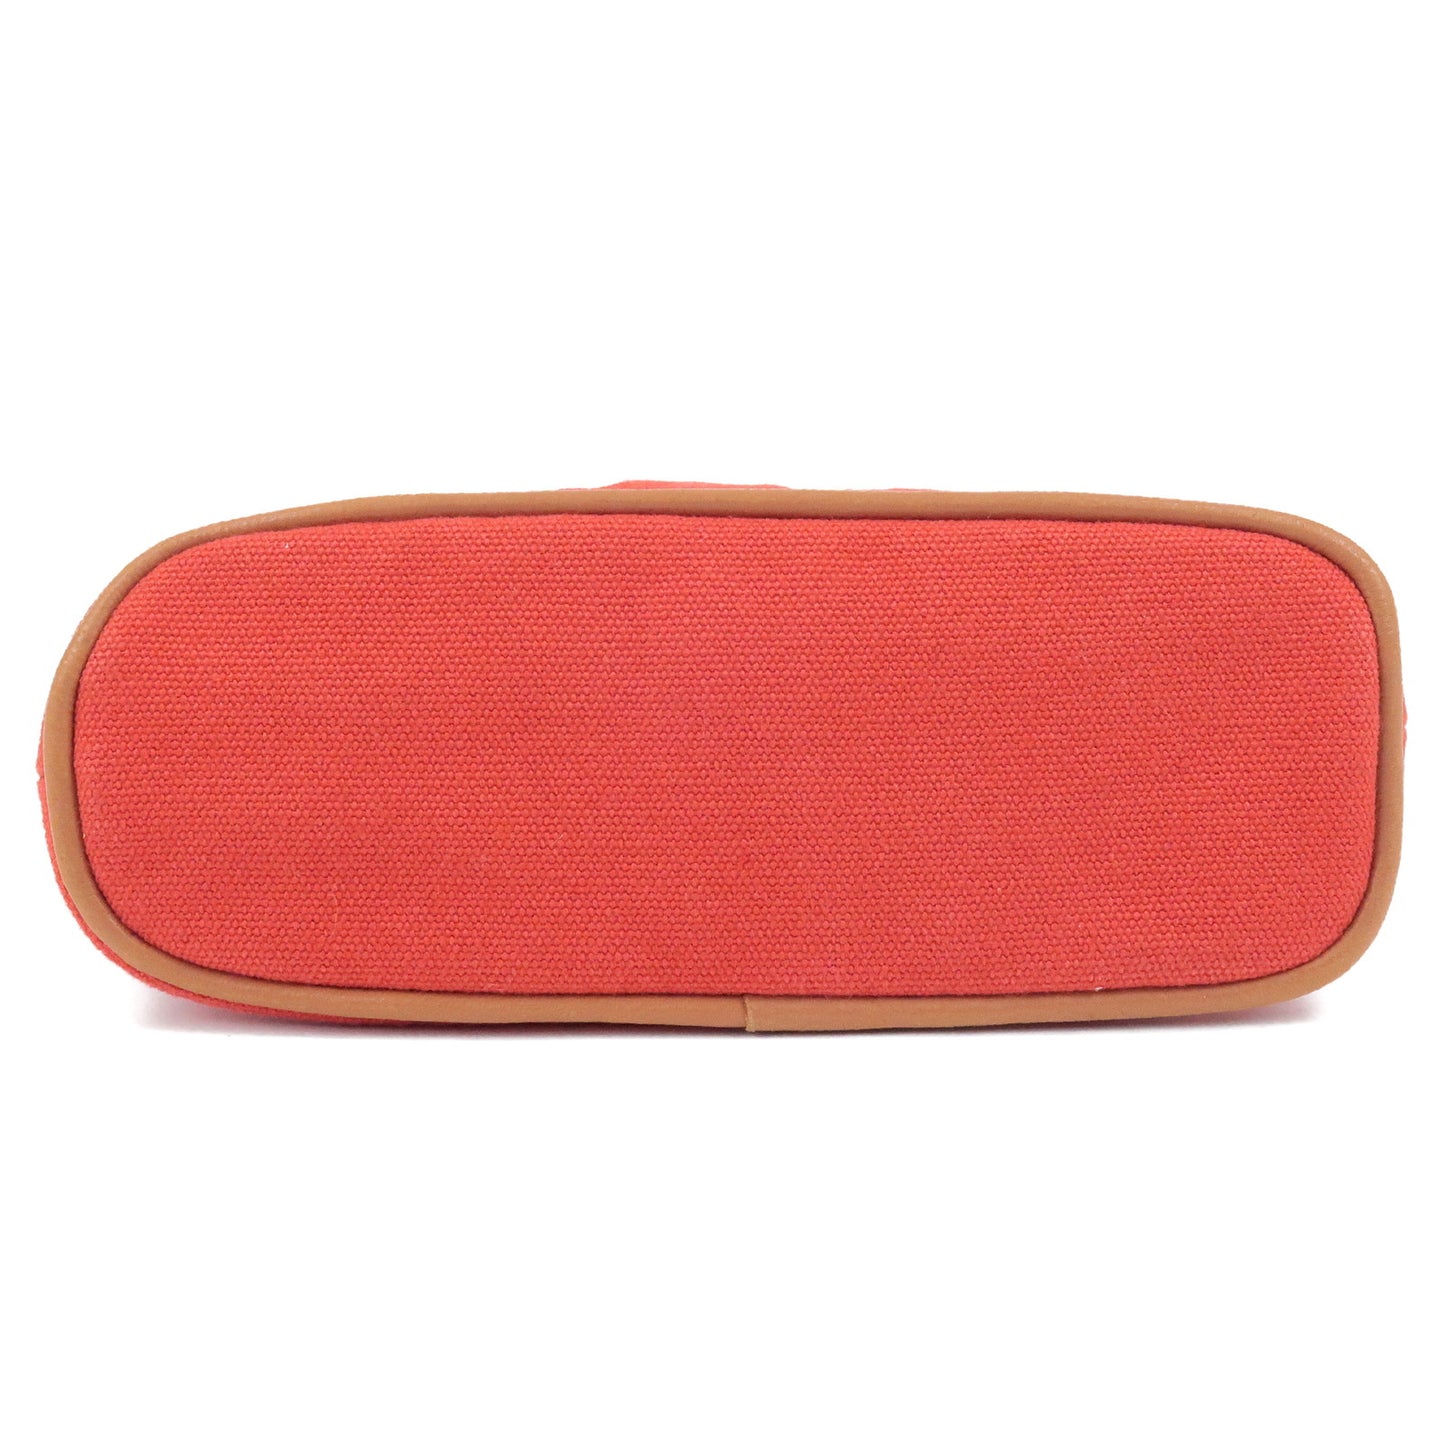 HERMES Bolide Pouch Canvas Leather Mini Cosmetics Bag Red Orange F/S